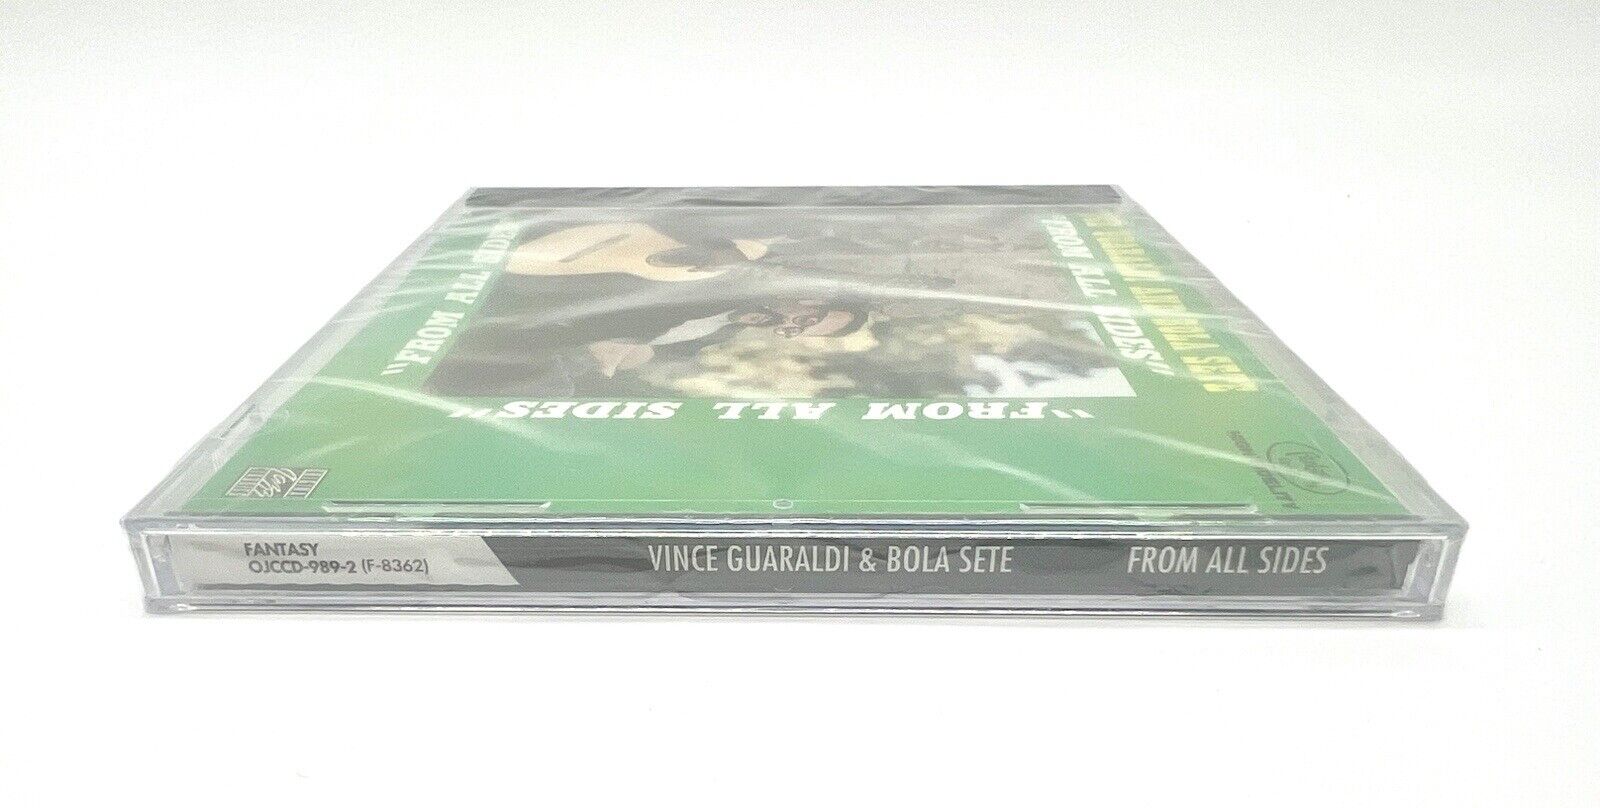 Vince Guaraldi and Bola Sete From All Sides Rare CD Brand New Sealed OOP Без бренда - фотография #5